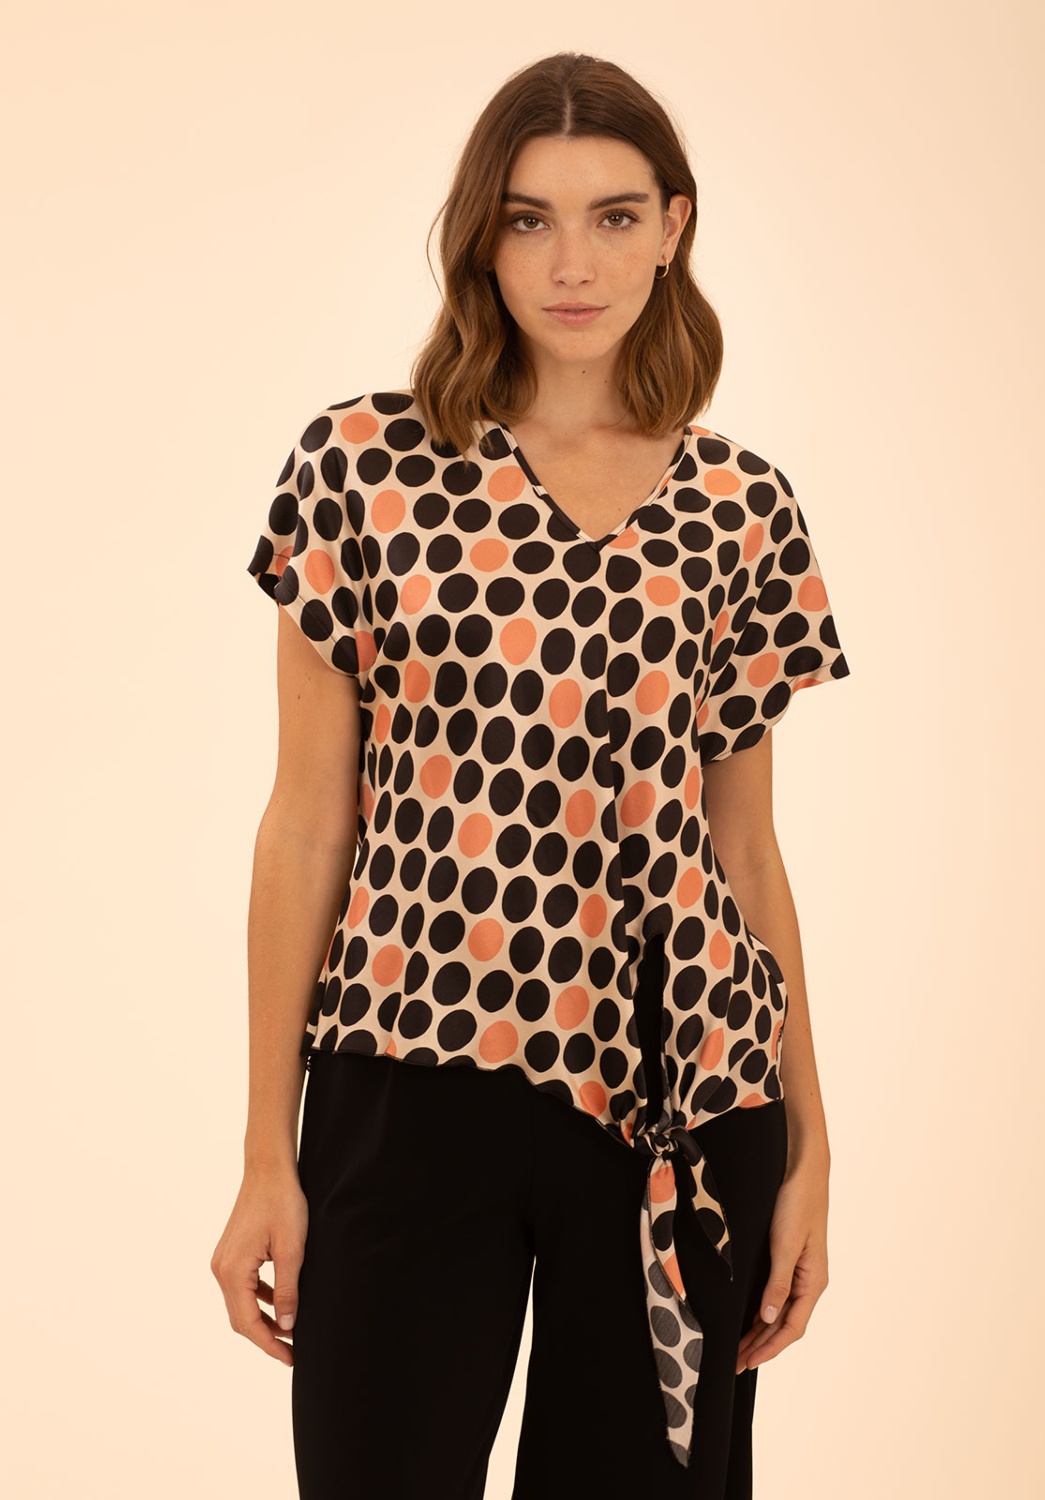 Knotted Polka Dot Blouse